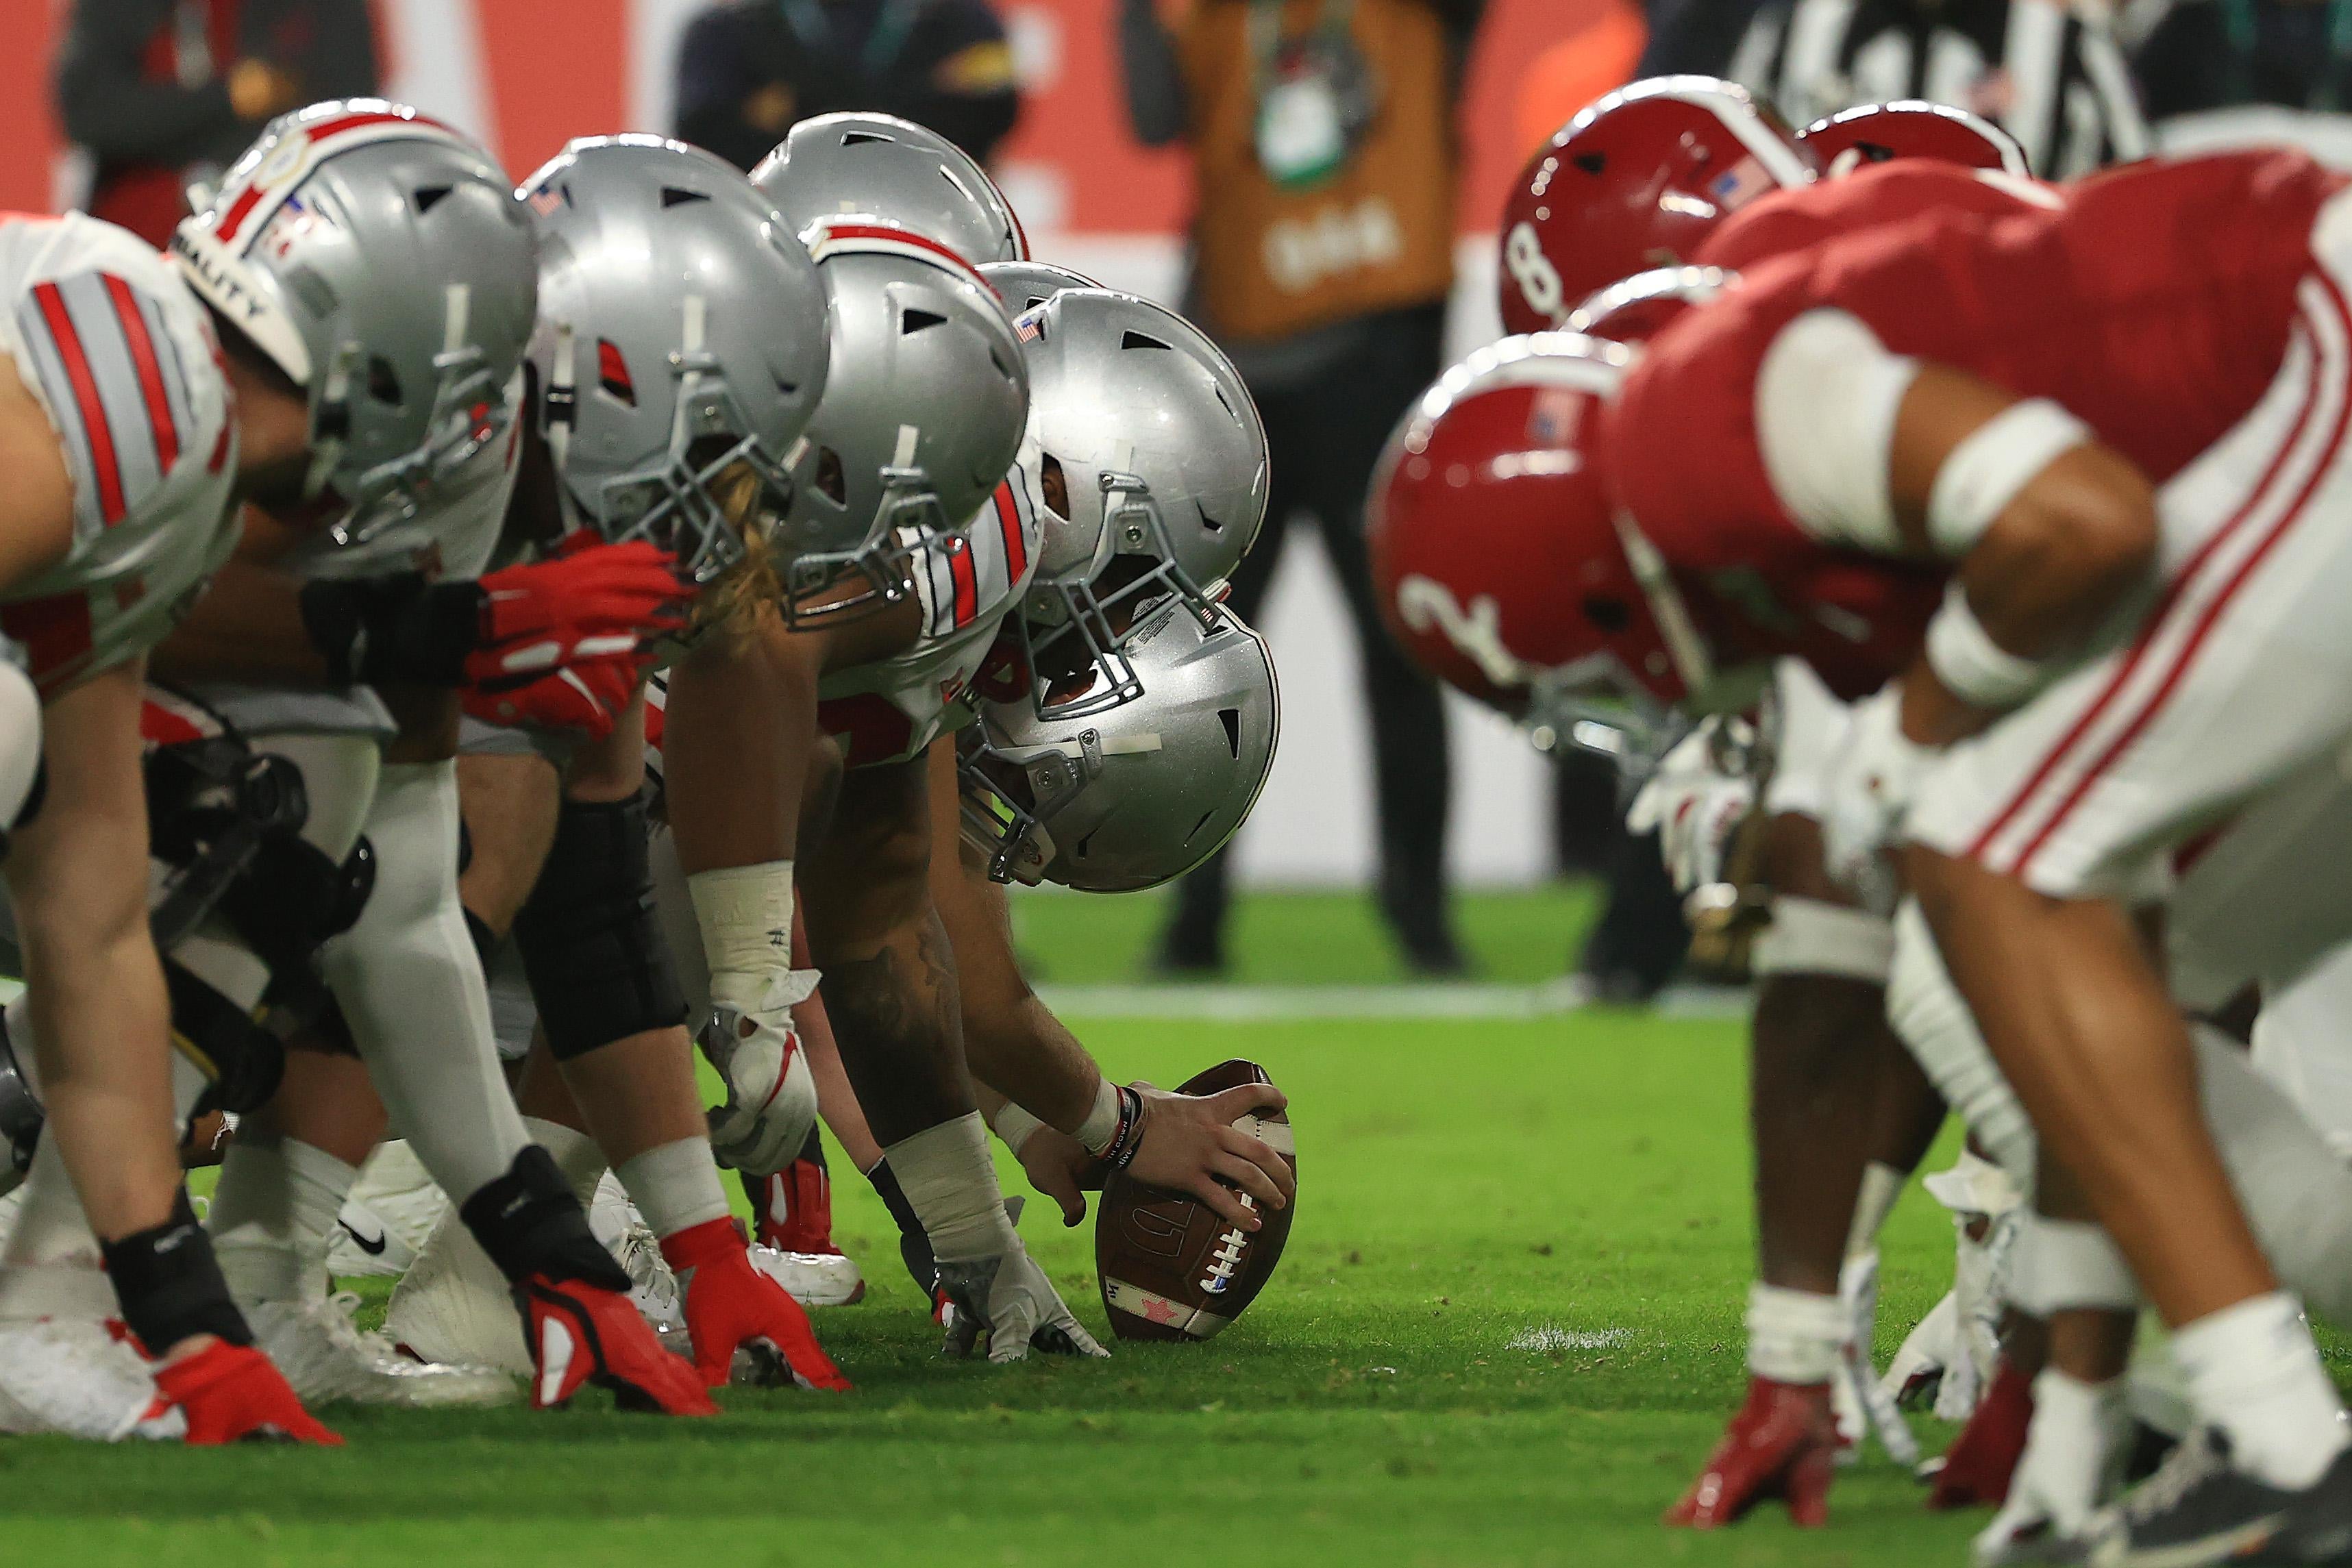 Ohio State's offensive line lined up ready to snap the ball against Alabama's defensive line